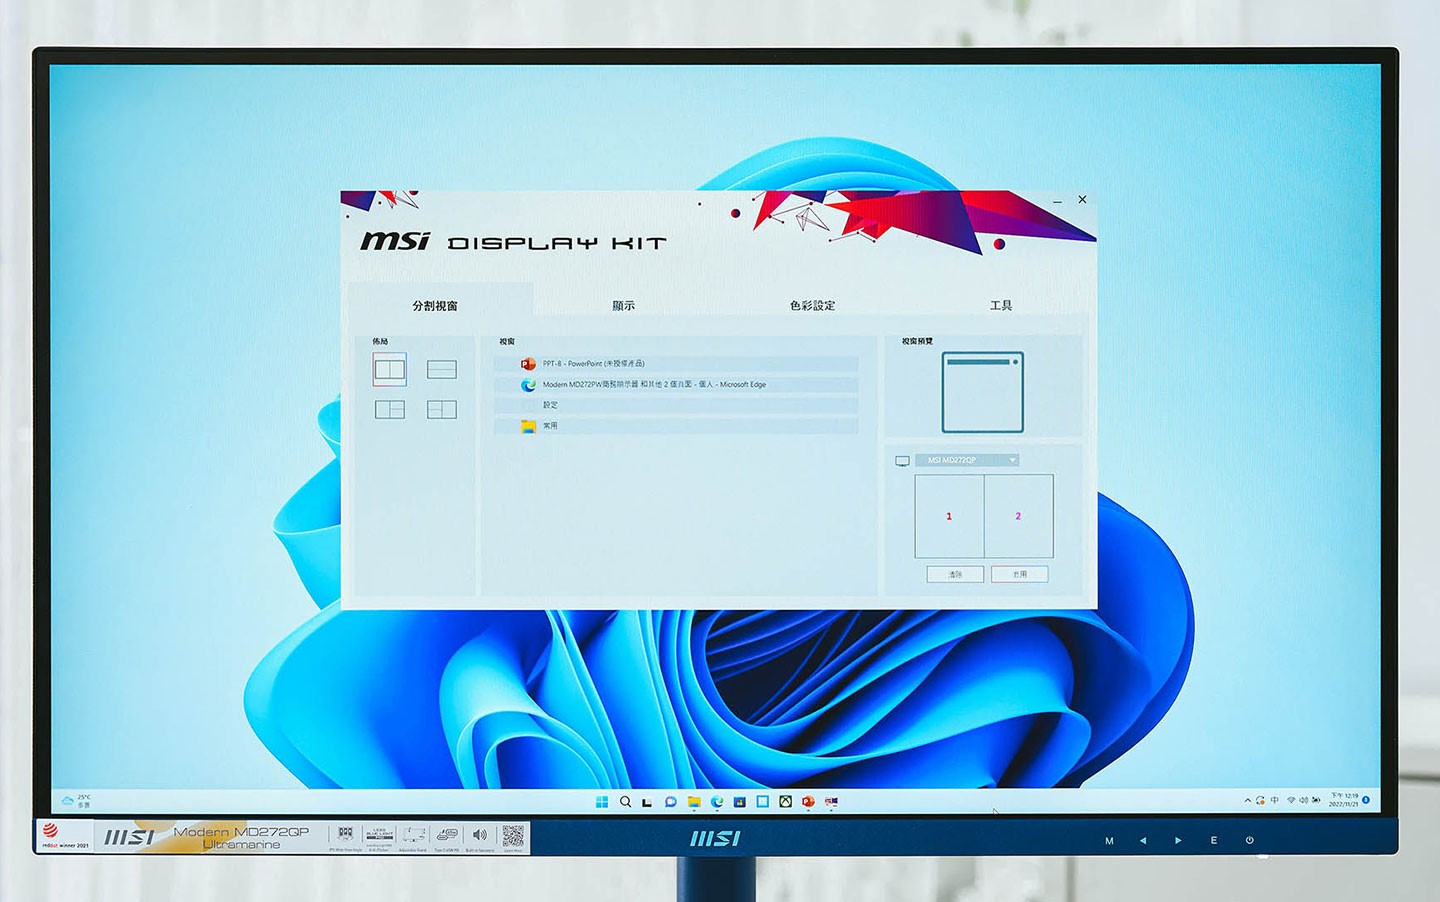 MSI Display Kit tools can be supported to bring more functions.